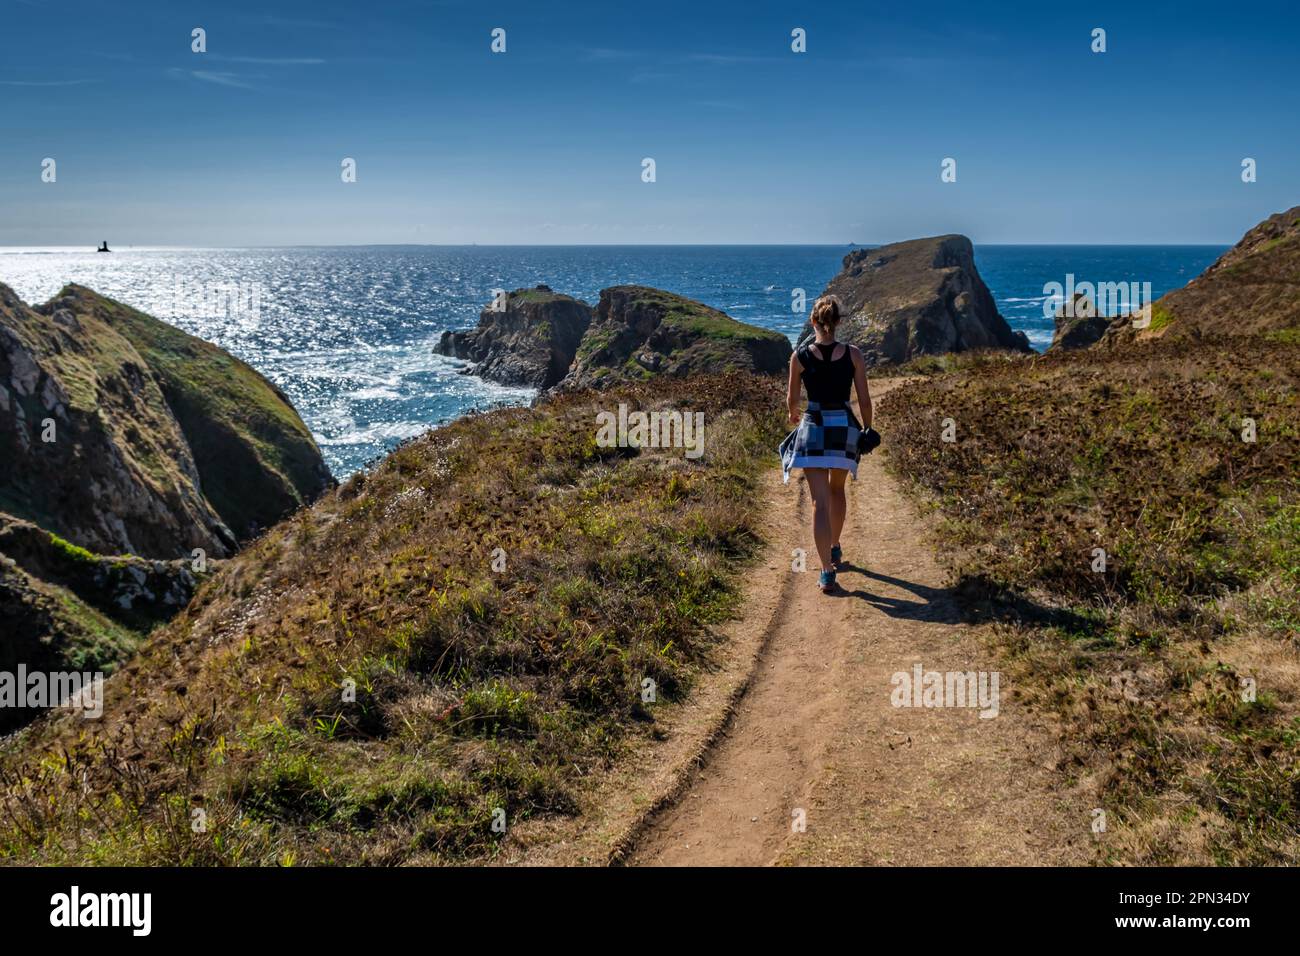 Young Woman On Coastal Hiking Path With Spectacular Cliffs At Peninsula Pointe Du Van On Cap Sizun At The Finistere Atlantic Coast In Brittany, France Stock Photo